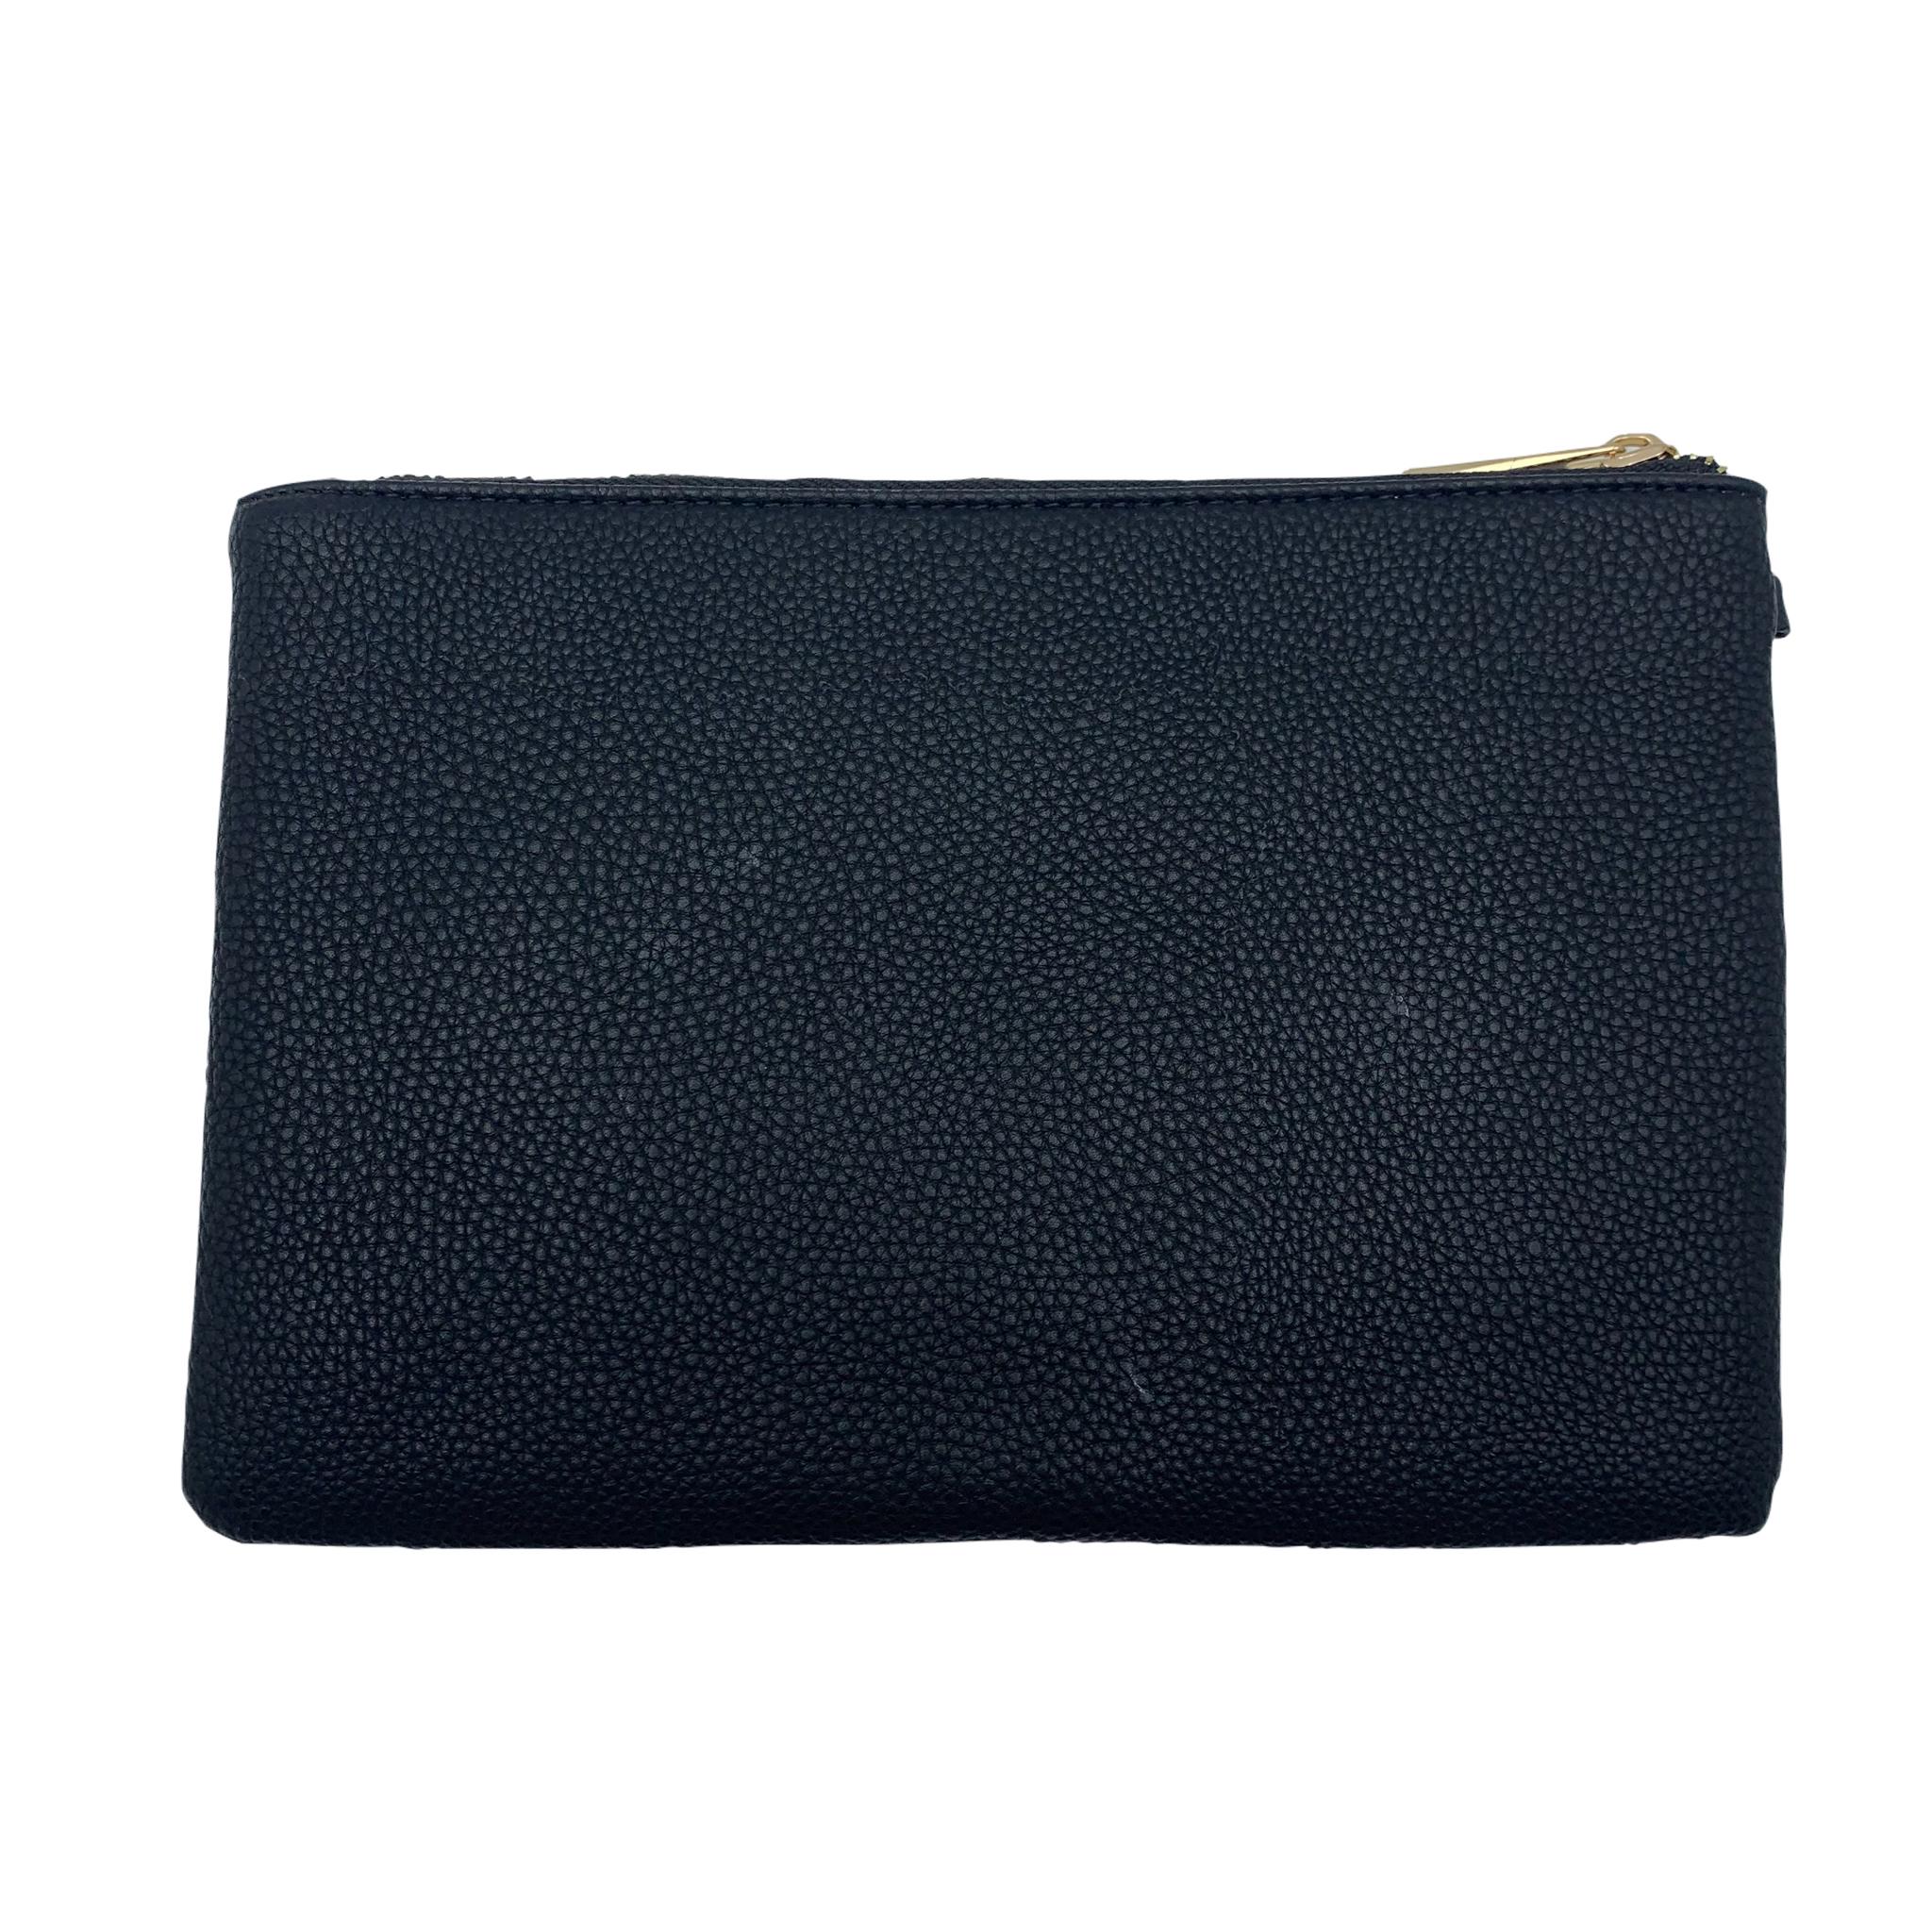 A simple, black leather zip-top pouch with a red line down the middle. Having metallic butterflies and beatles across the front.
Zip-top closure
Made in china         
Pocket inside.                                                                   